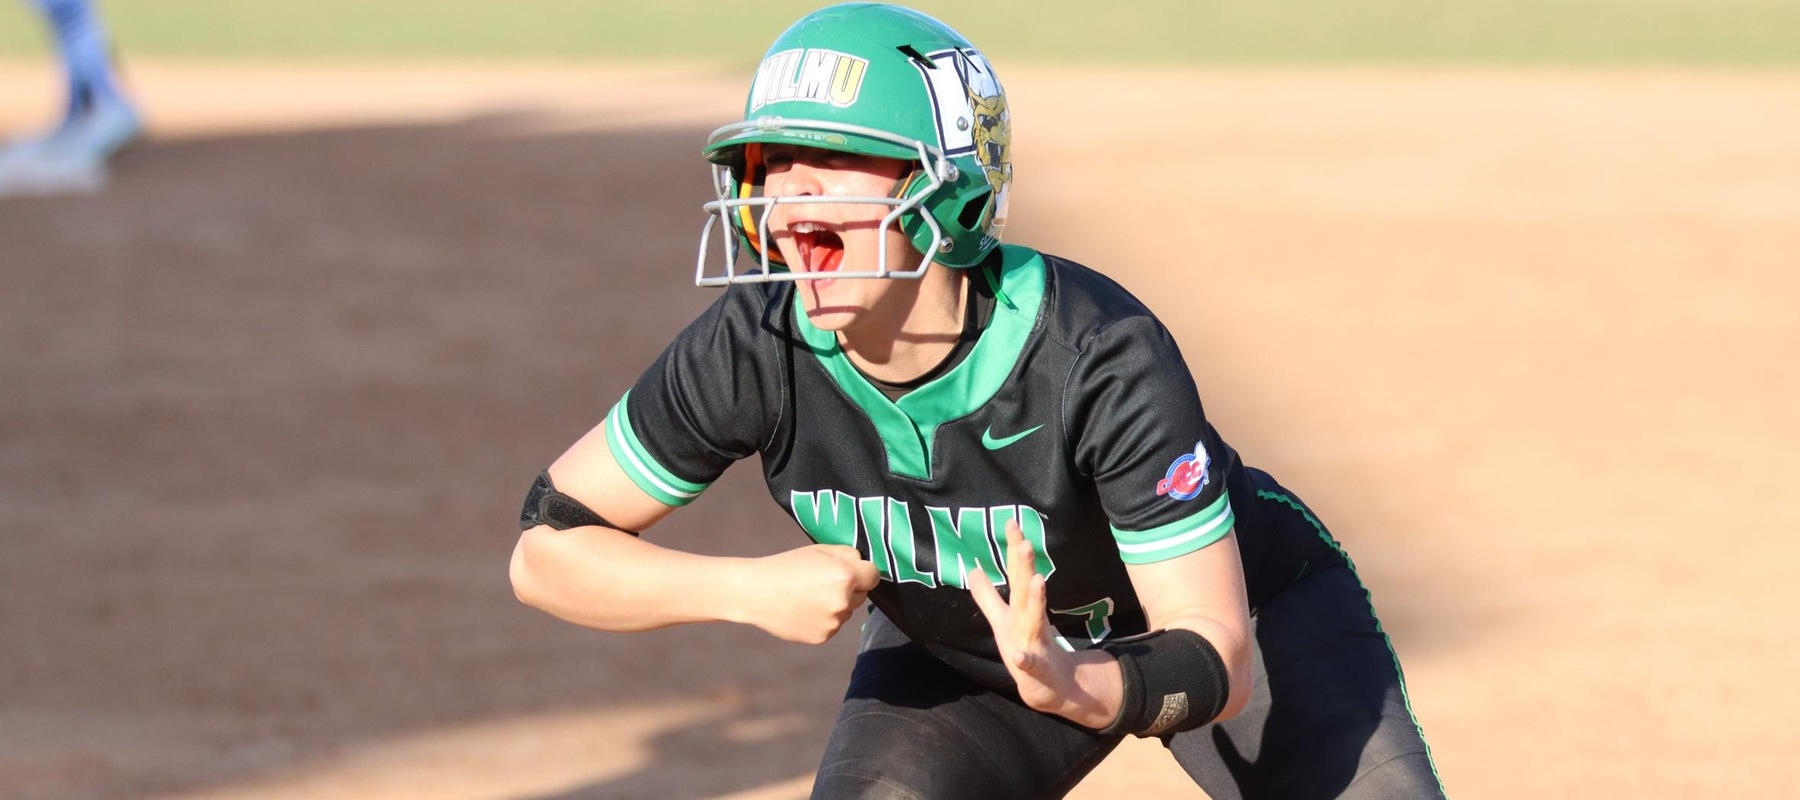 Photo following Tristyn Stewart's RBI single in the 8th inning of game one at Embry-Riddle. Copyright 2023; Wilmington University. all rights reserved. Photo by Erin Harvey. February 28, 2023 at Embry-Riddle